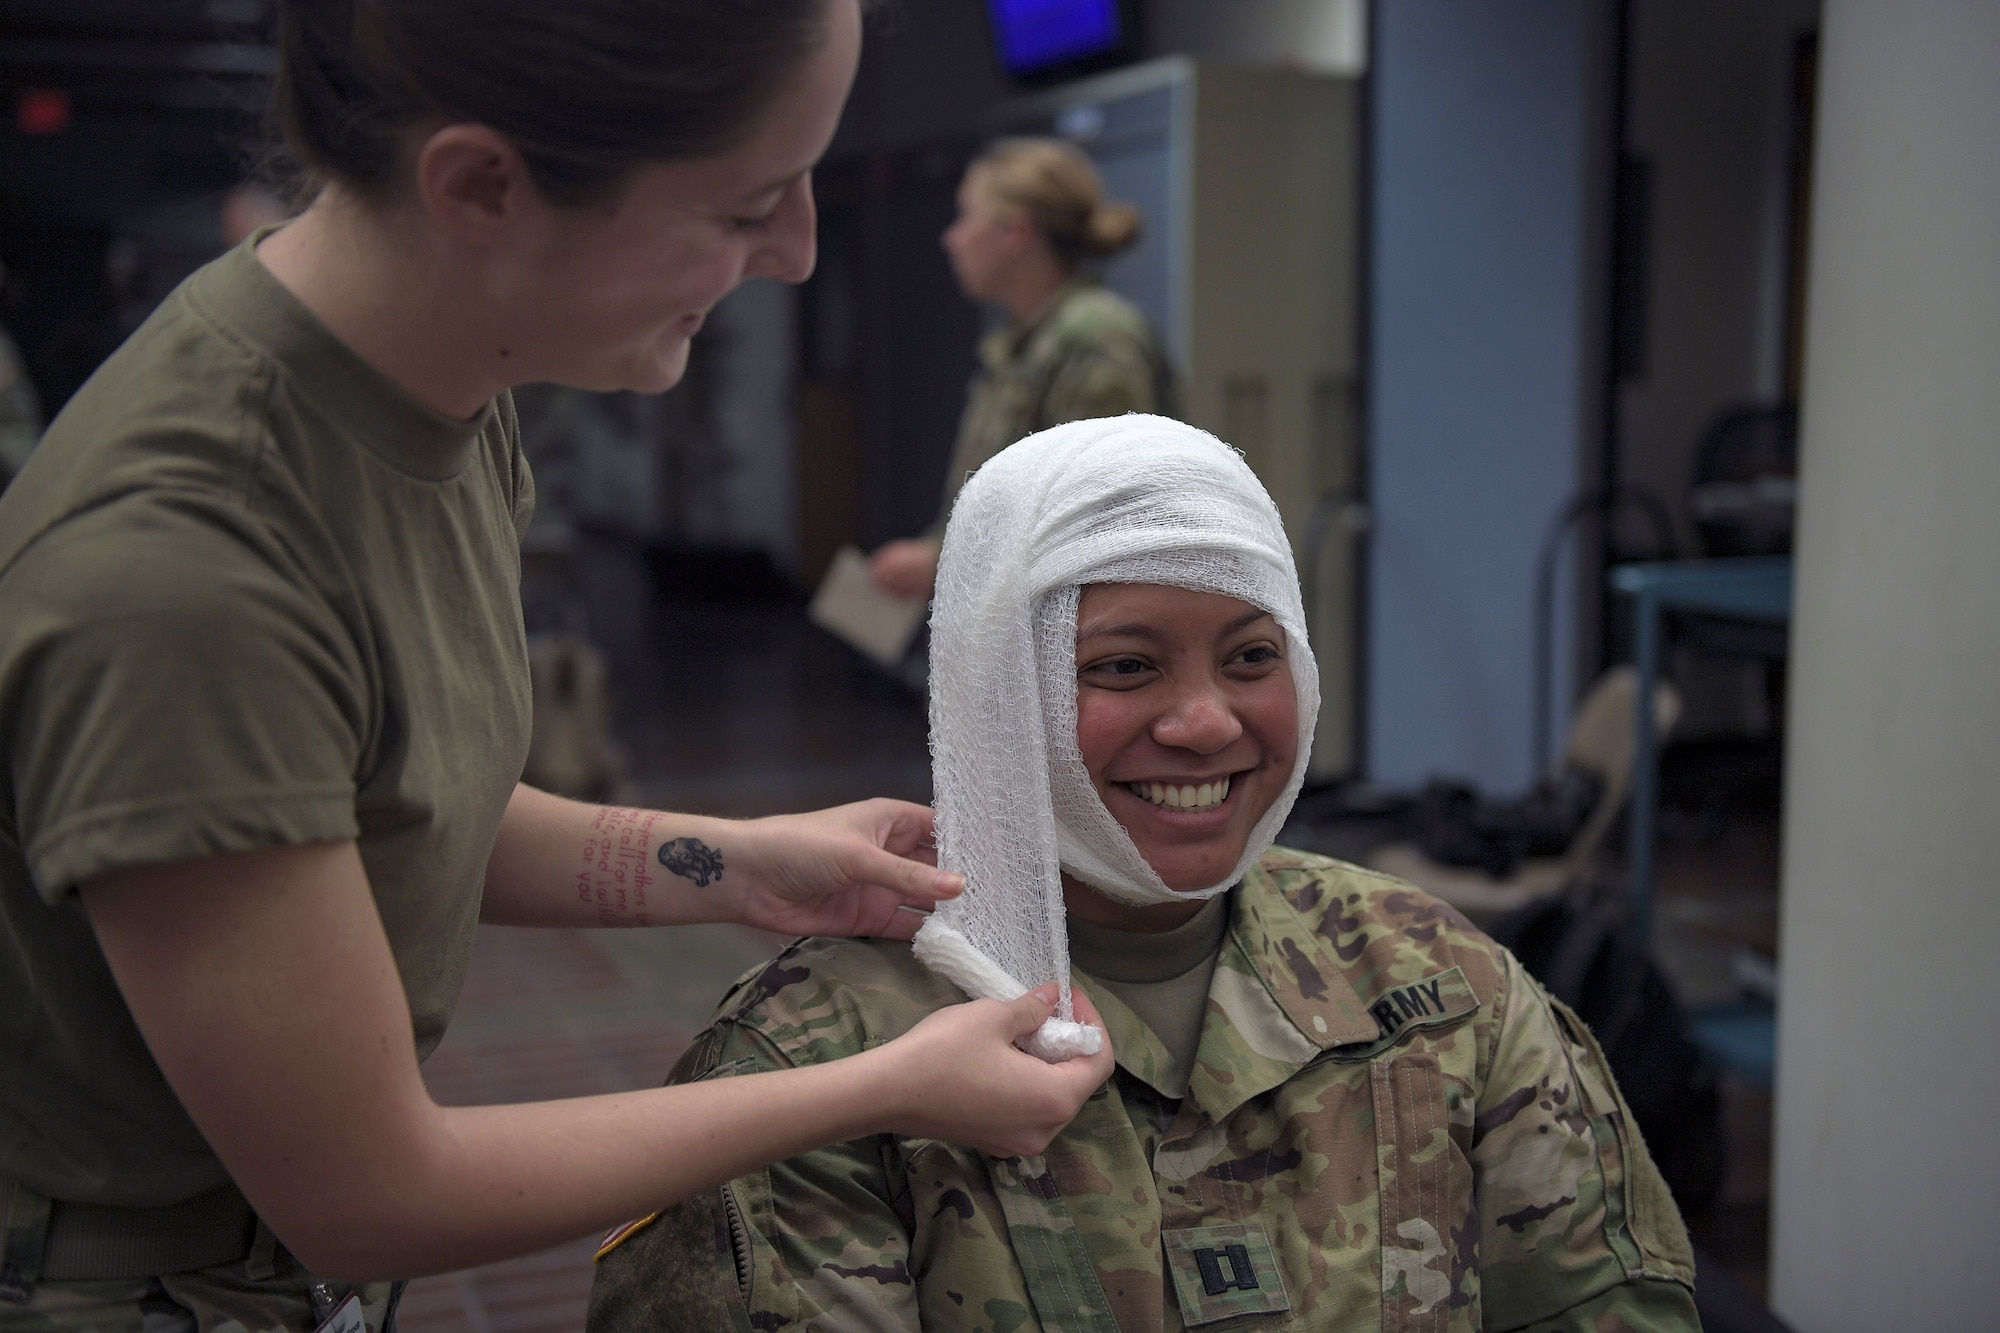 A soldier smiles as an Airman from the 51st Medical Group dresses her head wound during Operation Ascending Eagle, Aug. 28, 2019, at Osan Air Base, Republic of Korea. Air Force and Army medics jointly operated in the simulated large casualty training to enhance their aeromedical evacuation and patient transportation procedures. (U.S. Air Force photo by Staff Sgt. Greg Nash)